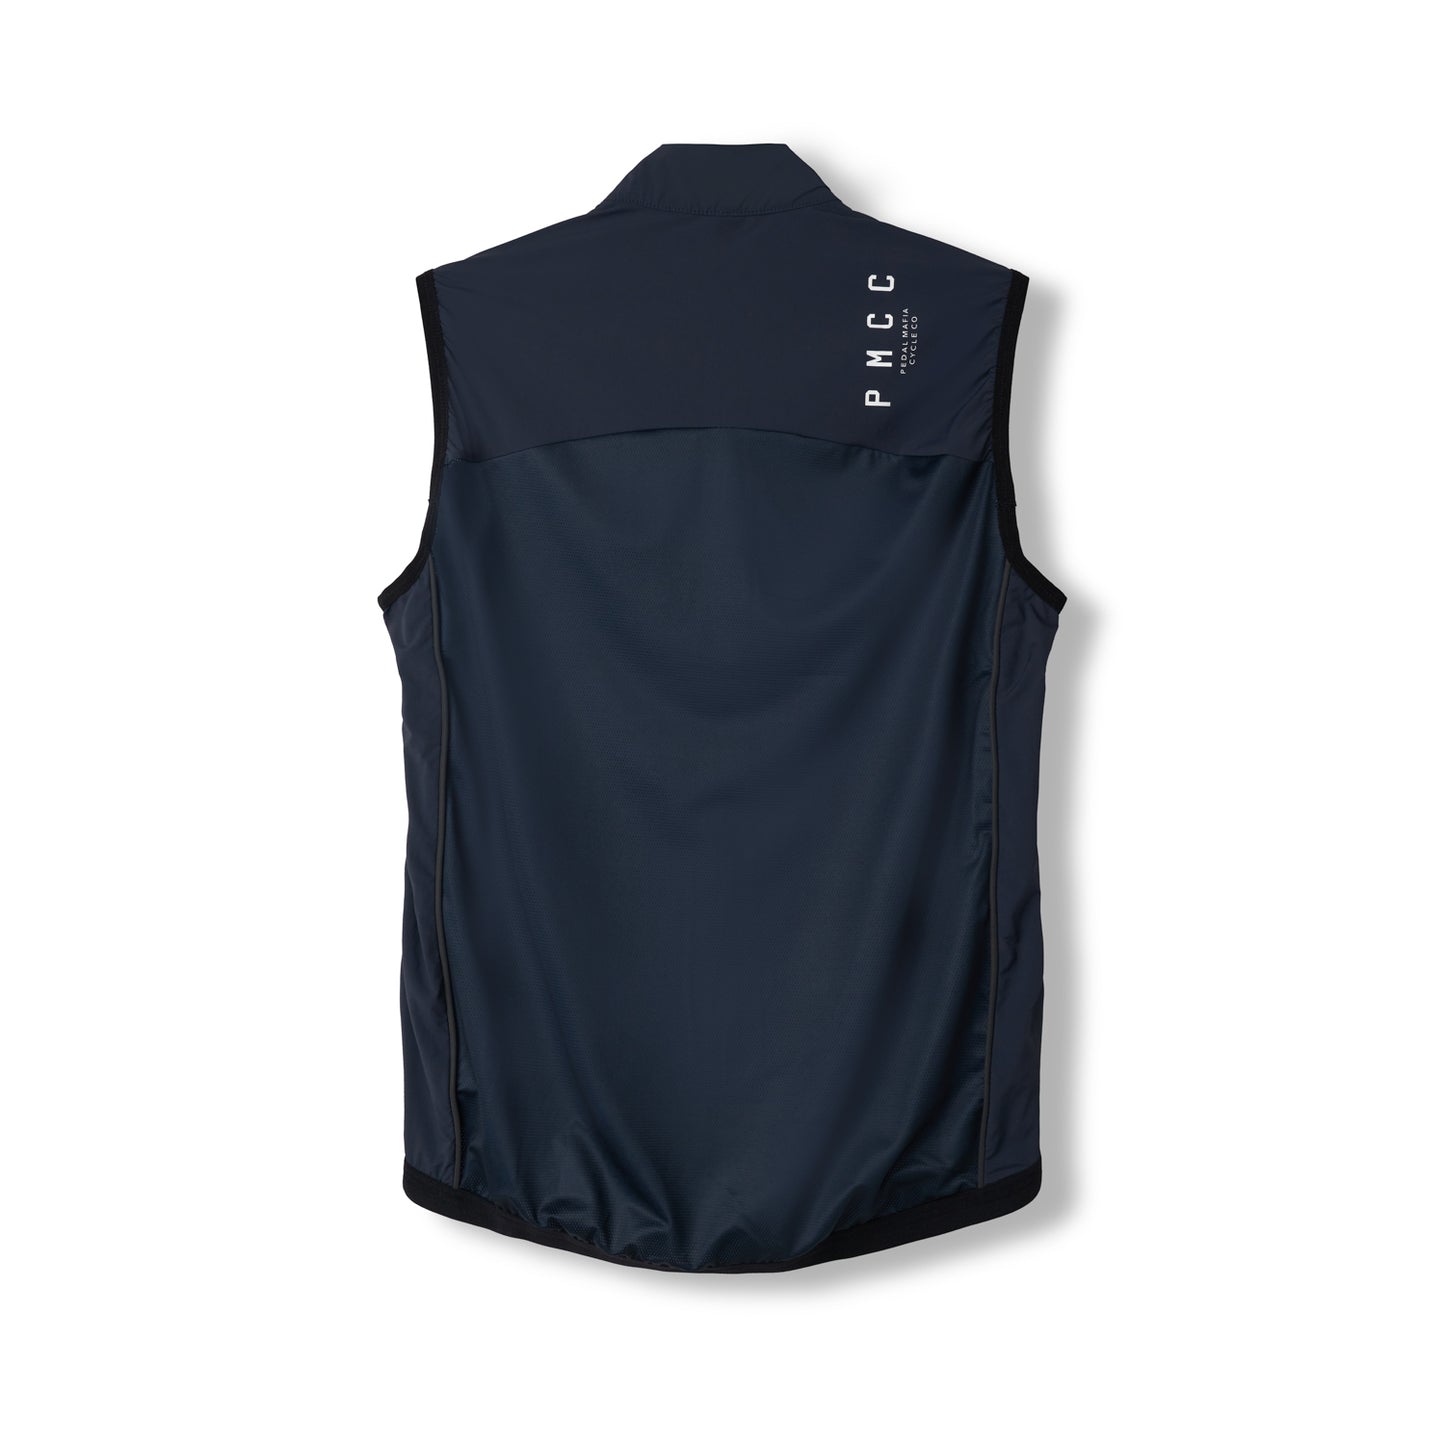 Mens PMCC Featherweight Vest - Navy